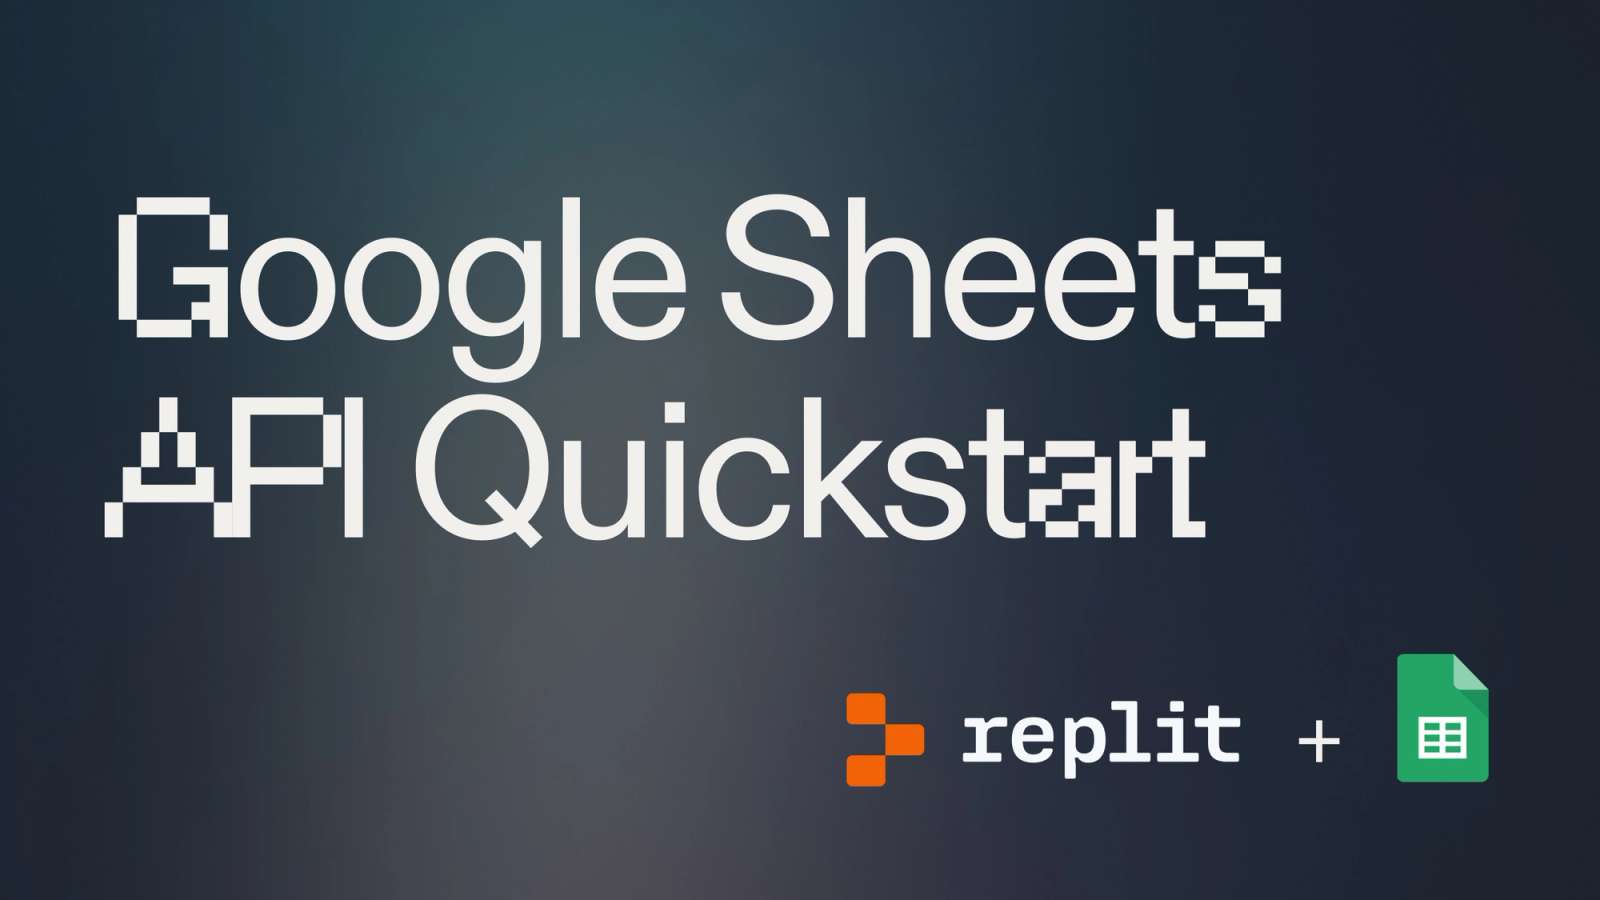 "Google Sheets API Quickstart" title cover image with the Replit and Google Sheets logos in the bottom-right